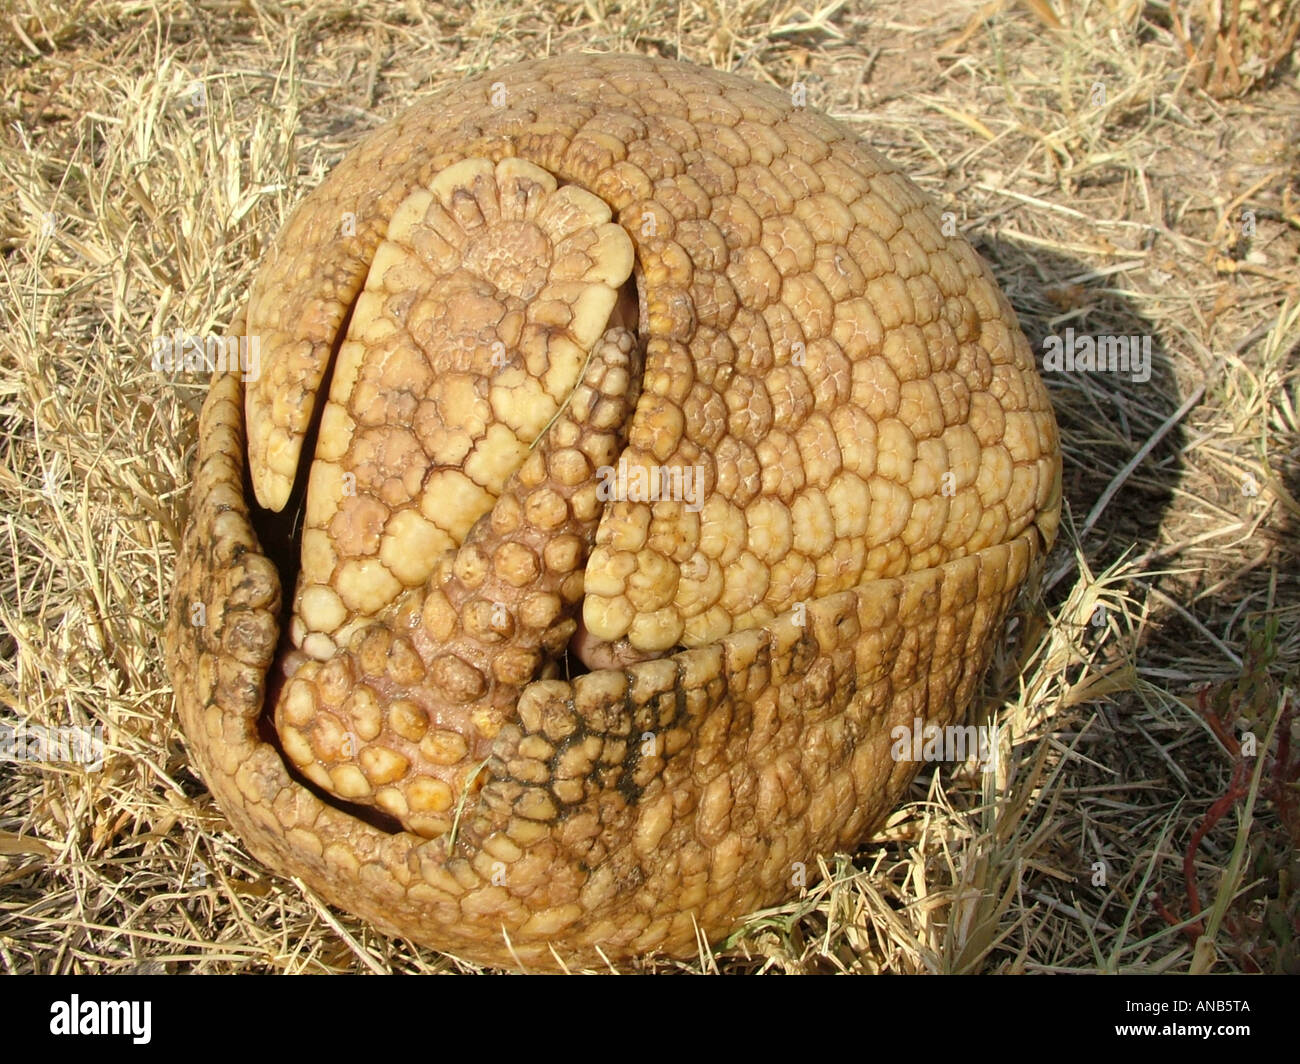 Drei-banded Armadillo (Tolypeutes Matacus) in Abwehrhaltung, Gran Chaco, Paraguay Stockfoto